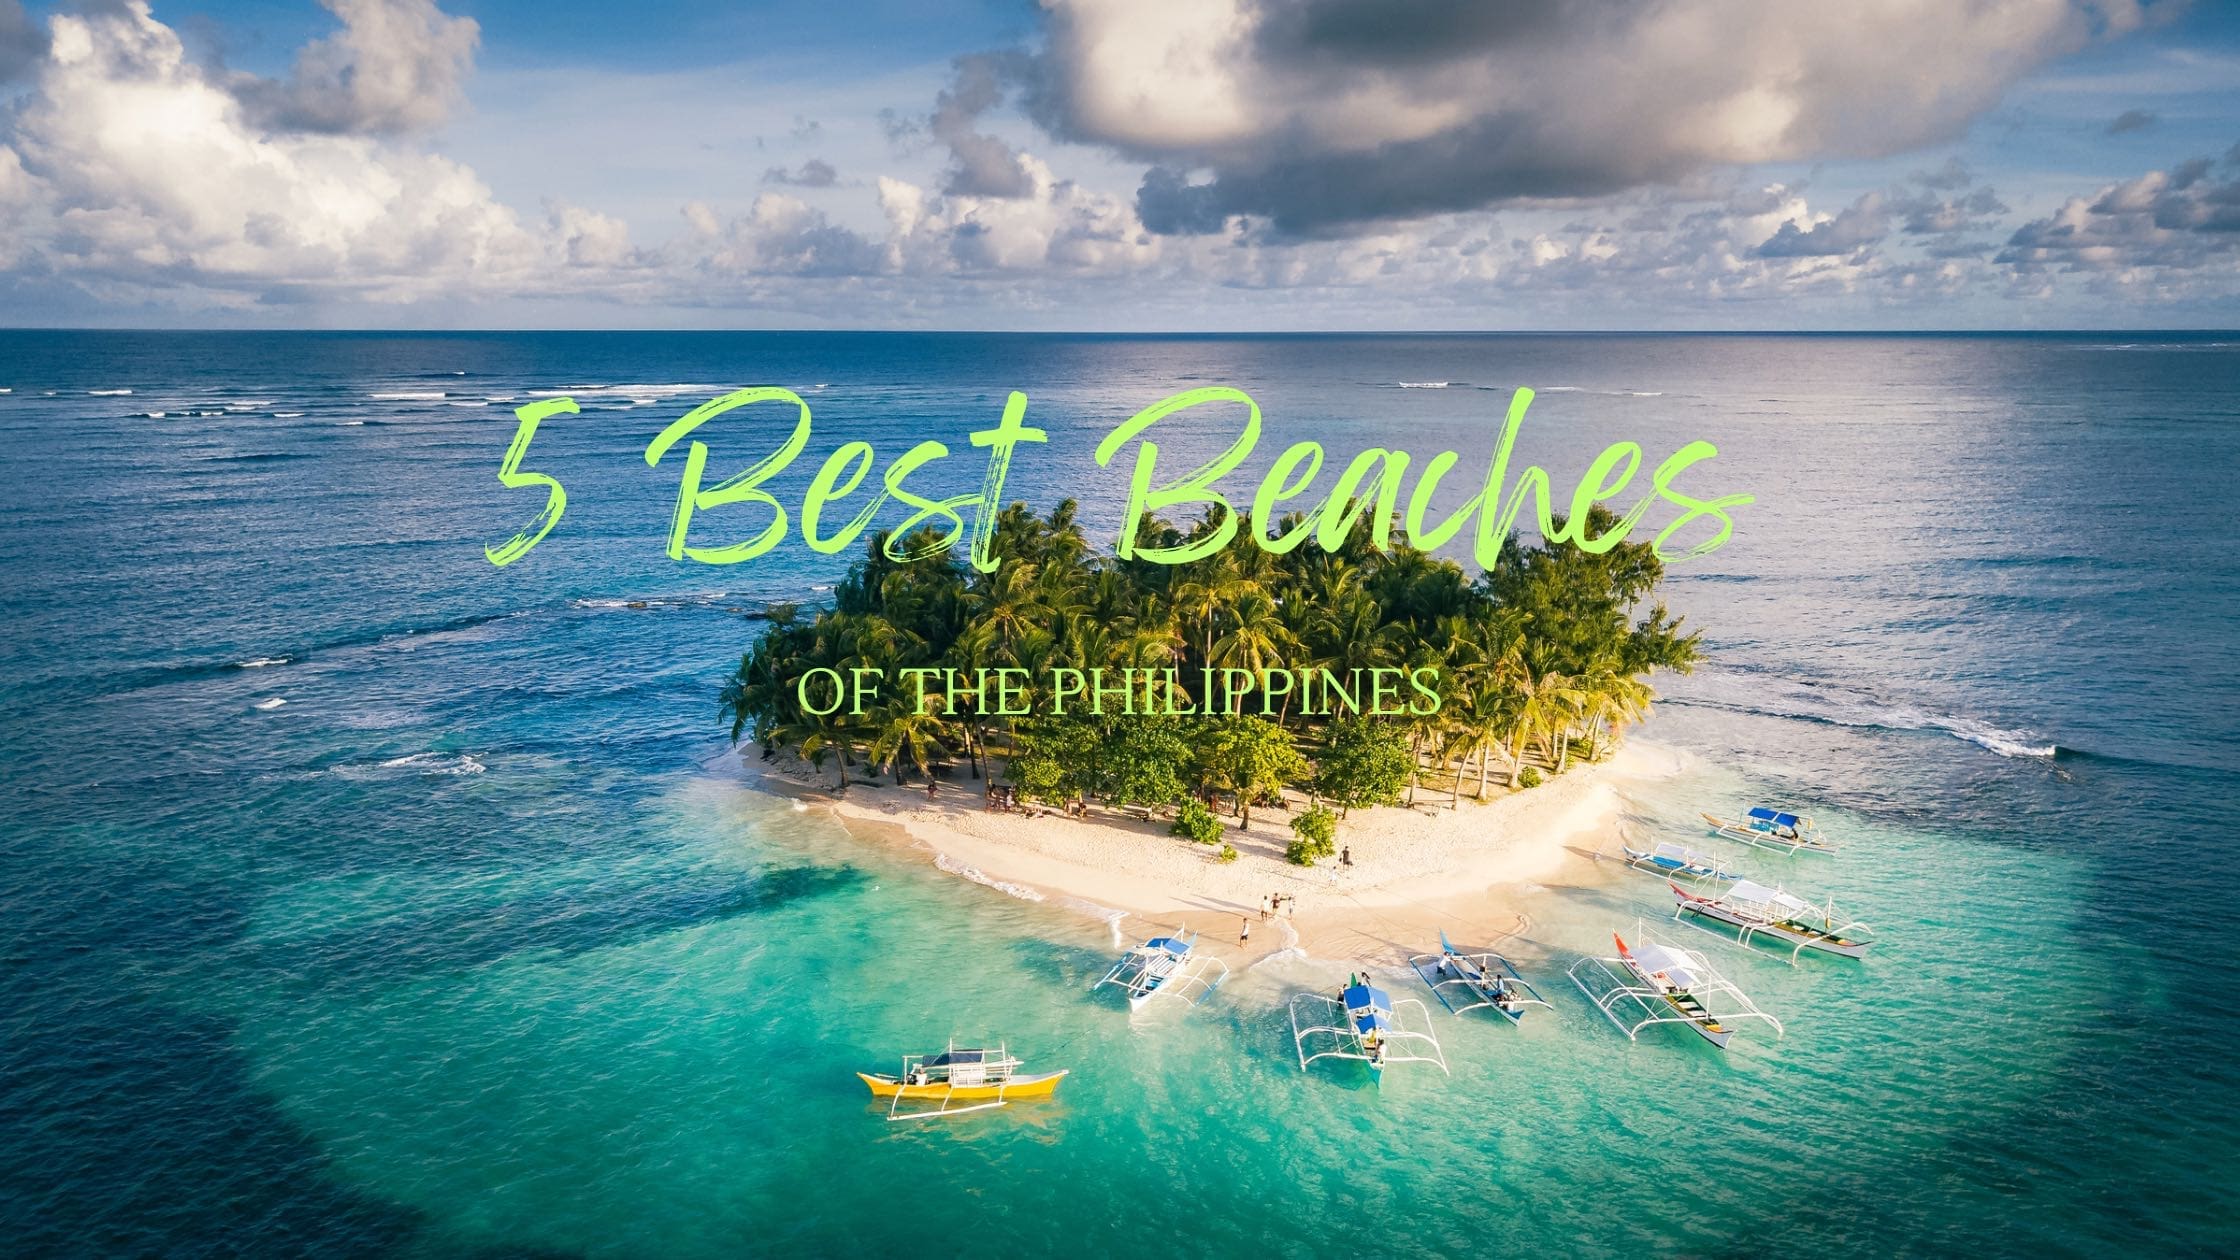 5 best beaches of the Philippines